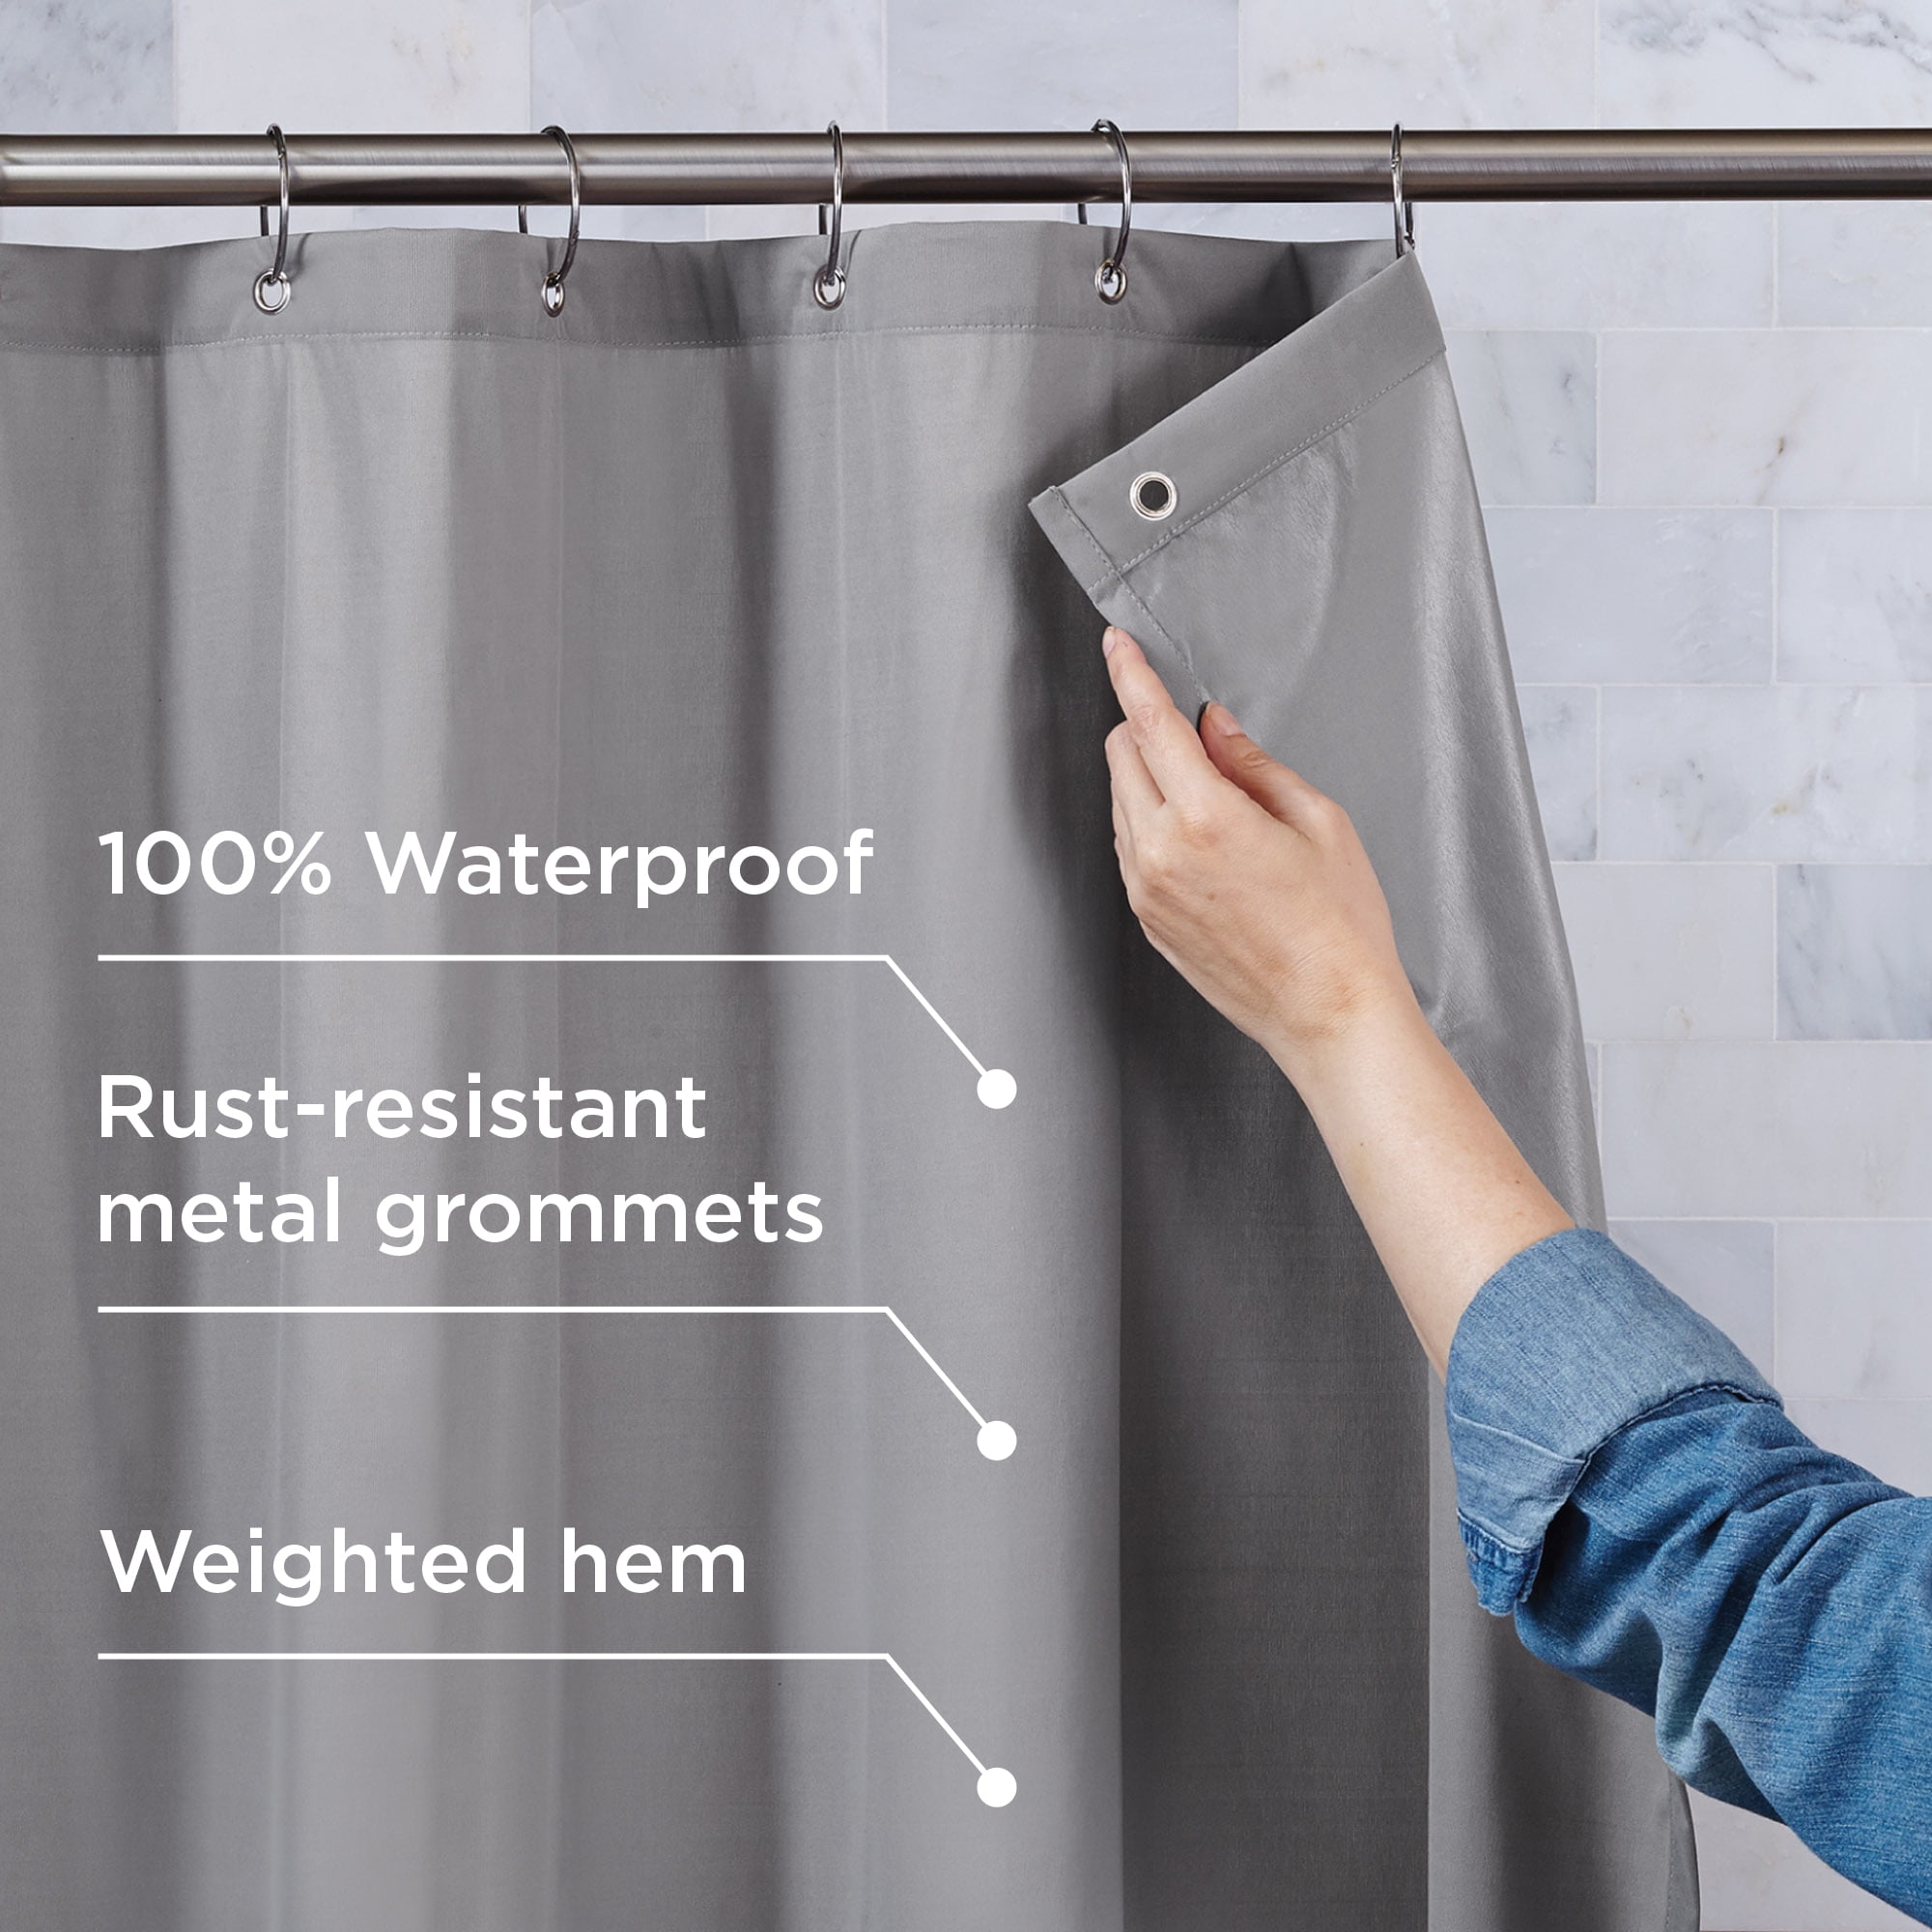 Waterproof Fabric Shower Curtain Or, Do All Shower Curtains Need Liners